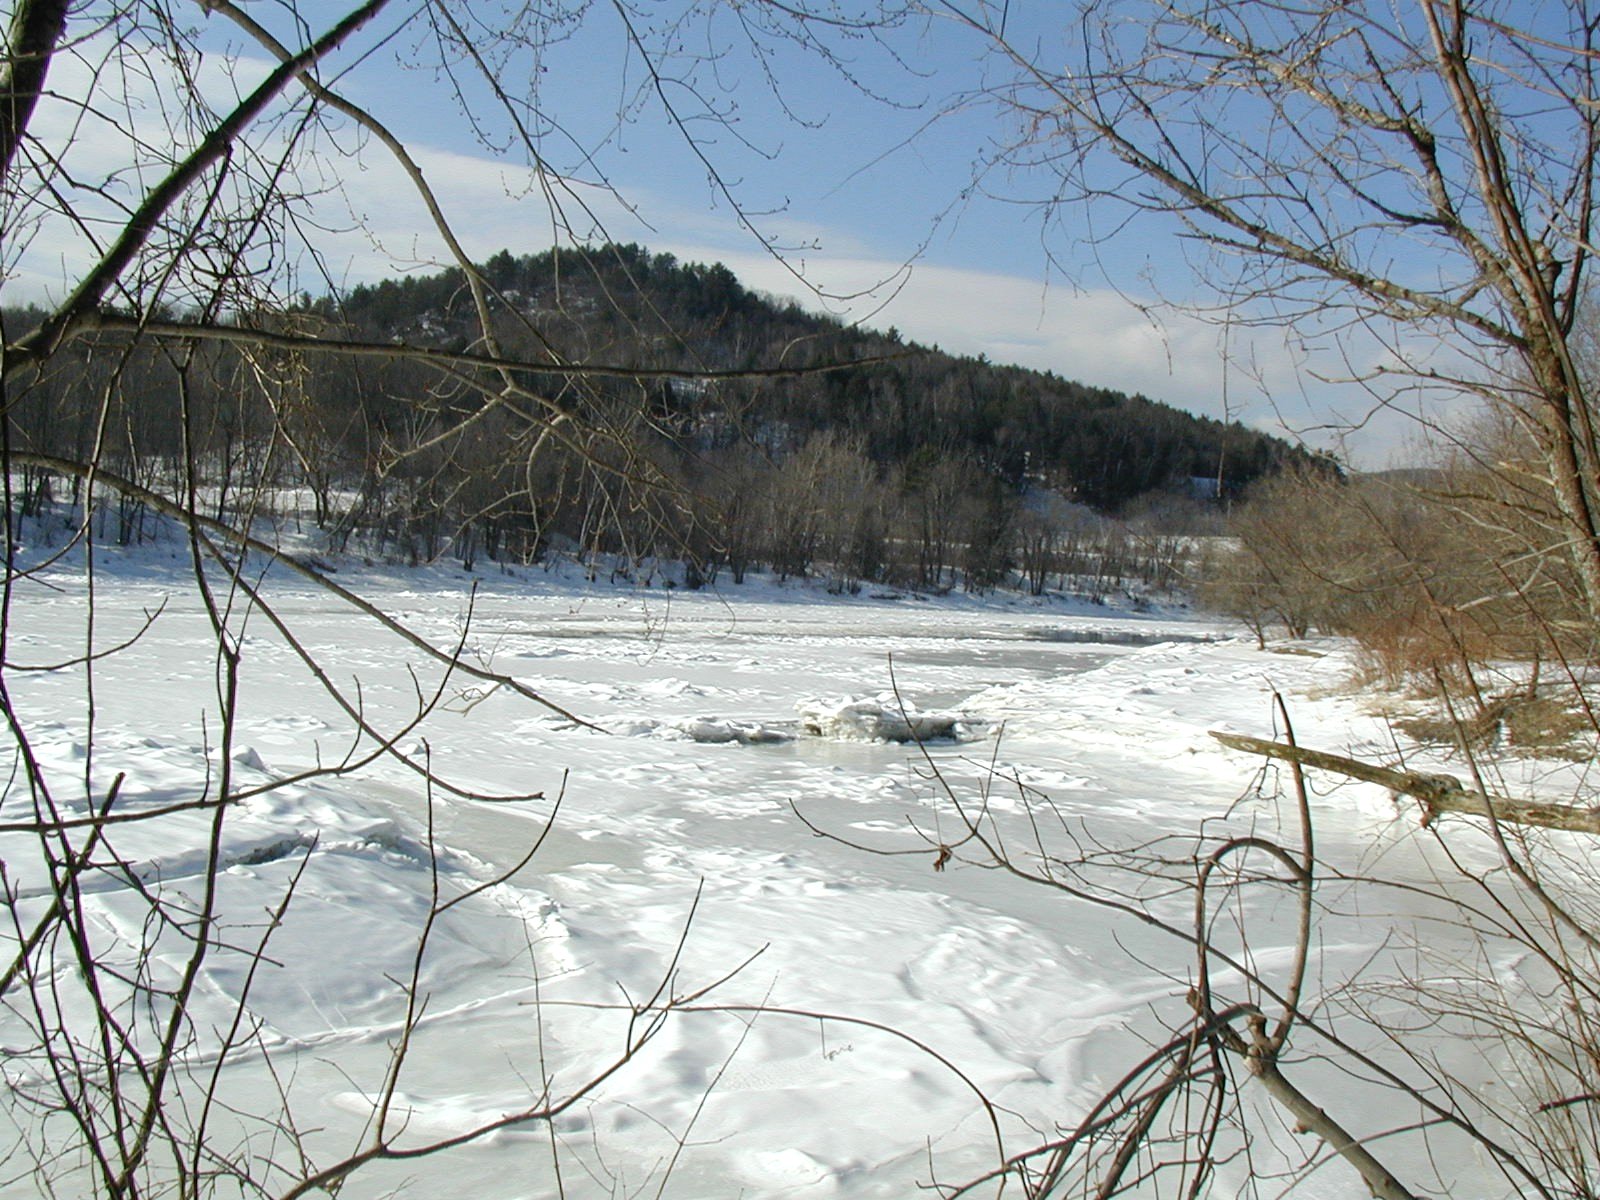 Photograph of the Connecticut River at West Lebanon, NH (WLBN3) affected by ice in February 2004.